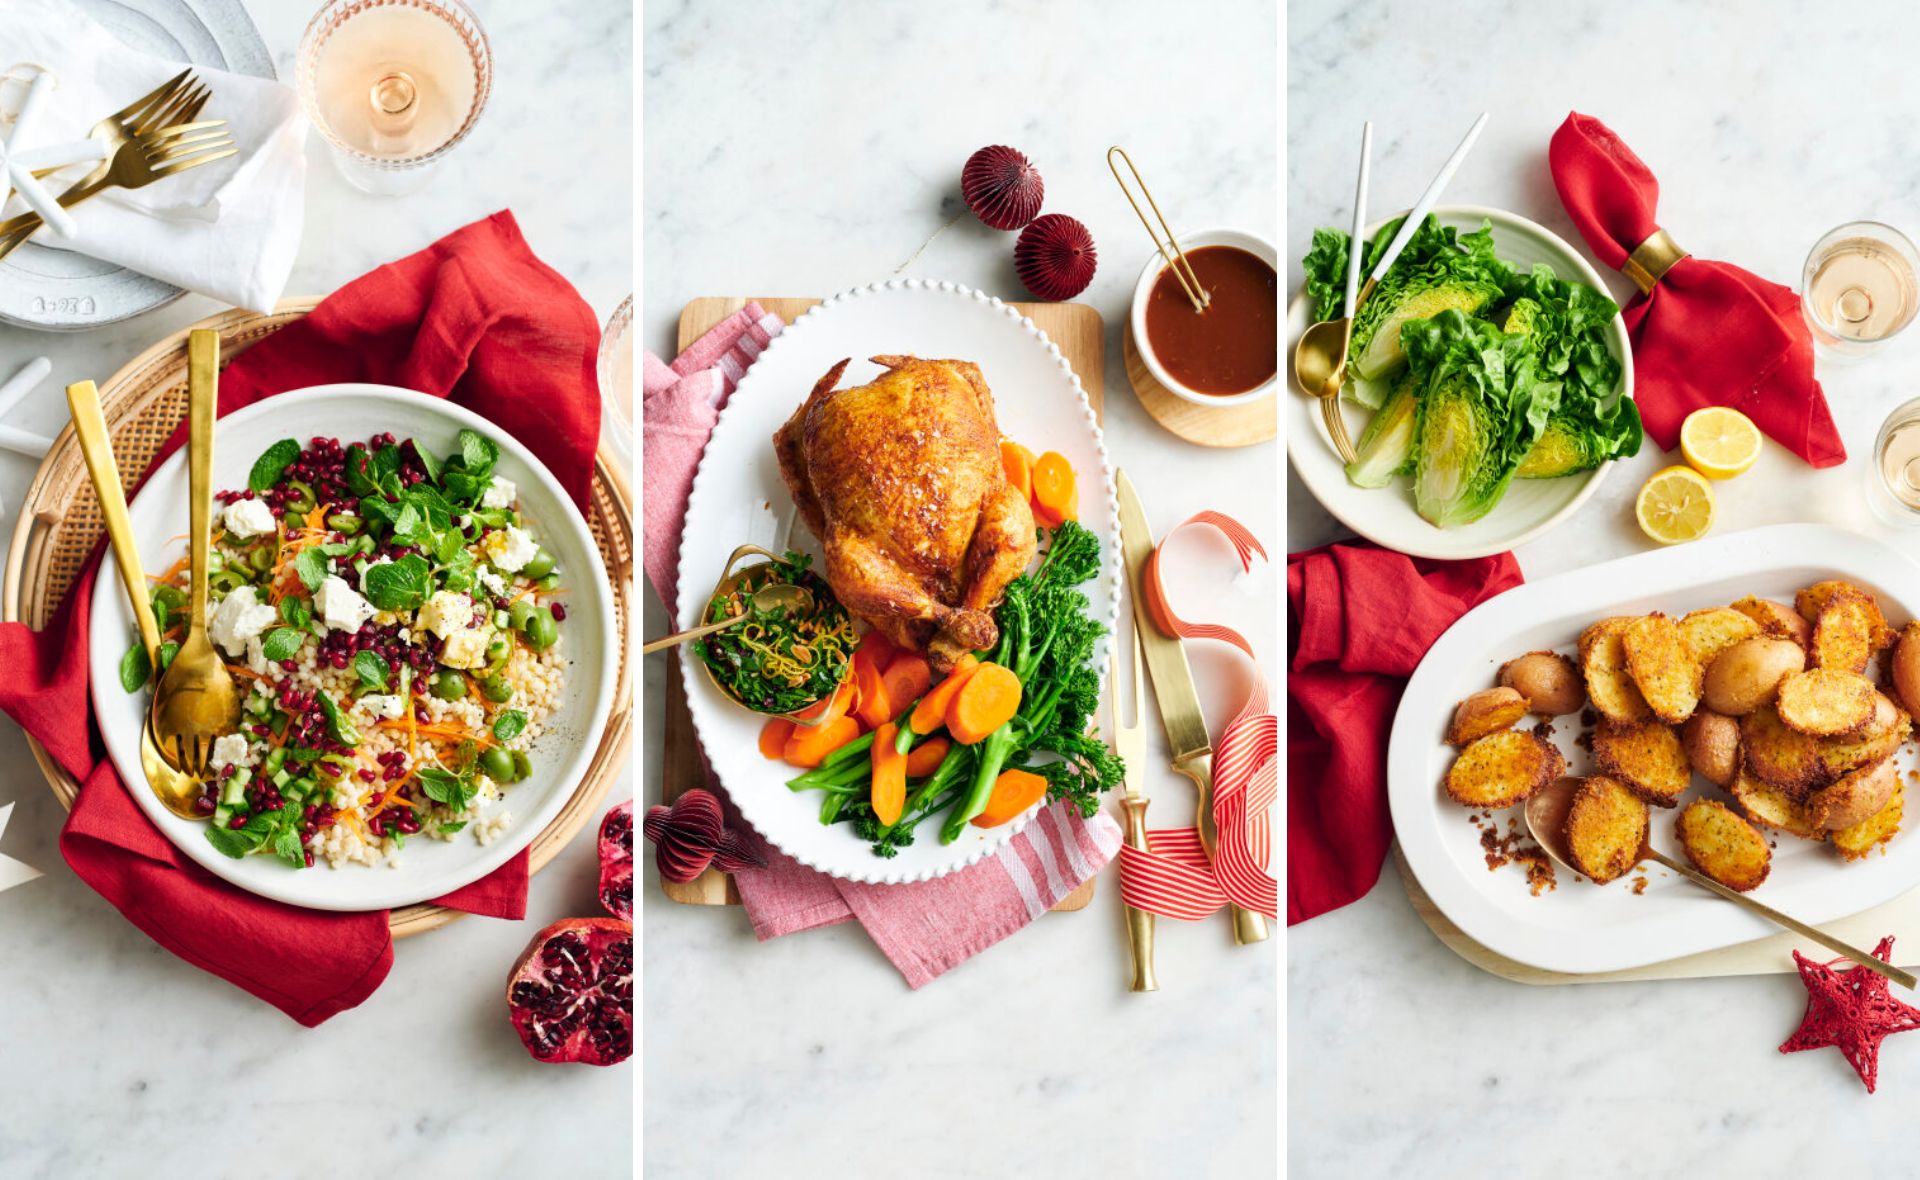 Cook cleverly and save with festive eats that won’t blow the budget